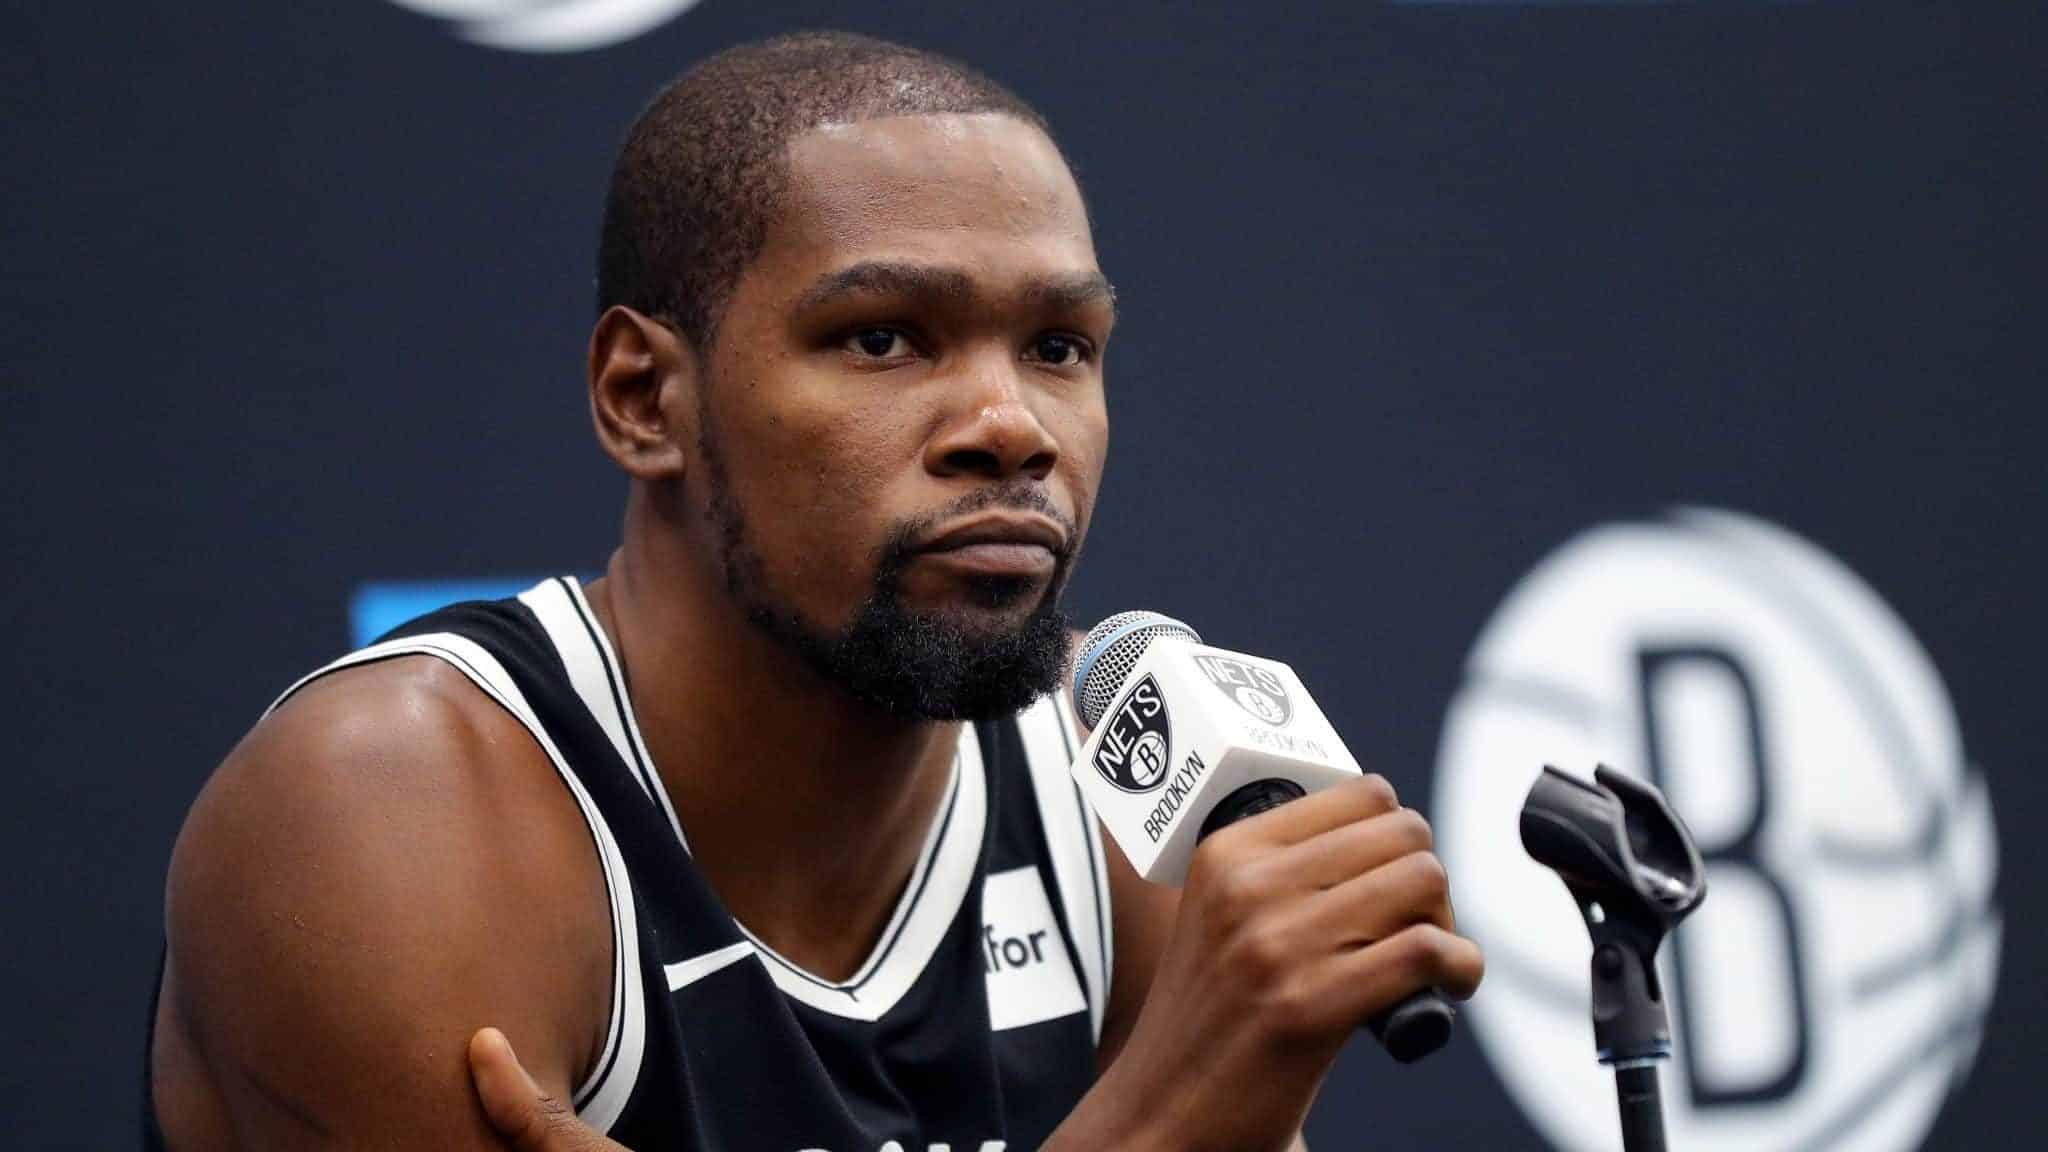 NEW YORK, NEW YORK - SEPTEMBER 27: Kevin Durant #7 of the Brooklyn Nets speaks to media during Brooklyn Nets Media Day at HSS Training Center on September 27, 2019 in the Brooklyn Borough of New York City. NOTE TO USER: User expressly acknowledges and agrees that, by downloading and or using this photograph, User is consenting to the terms and conditions of the Getty Images License Agreement.